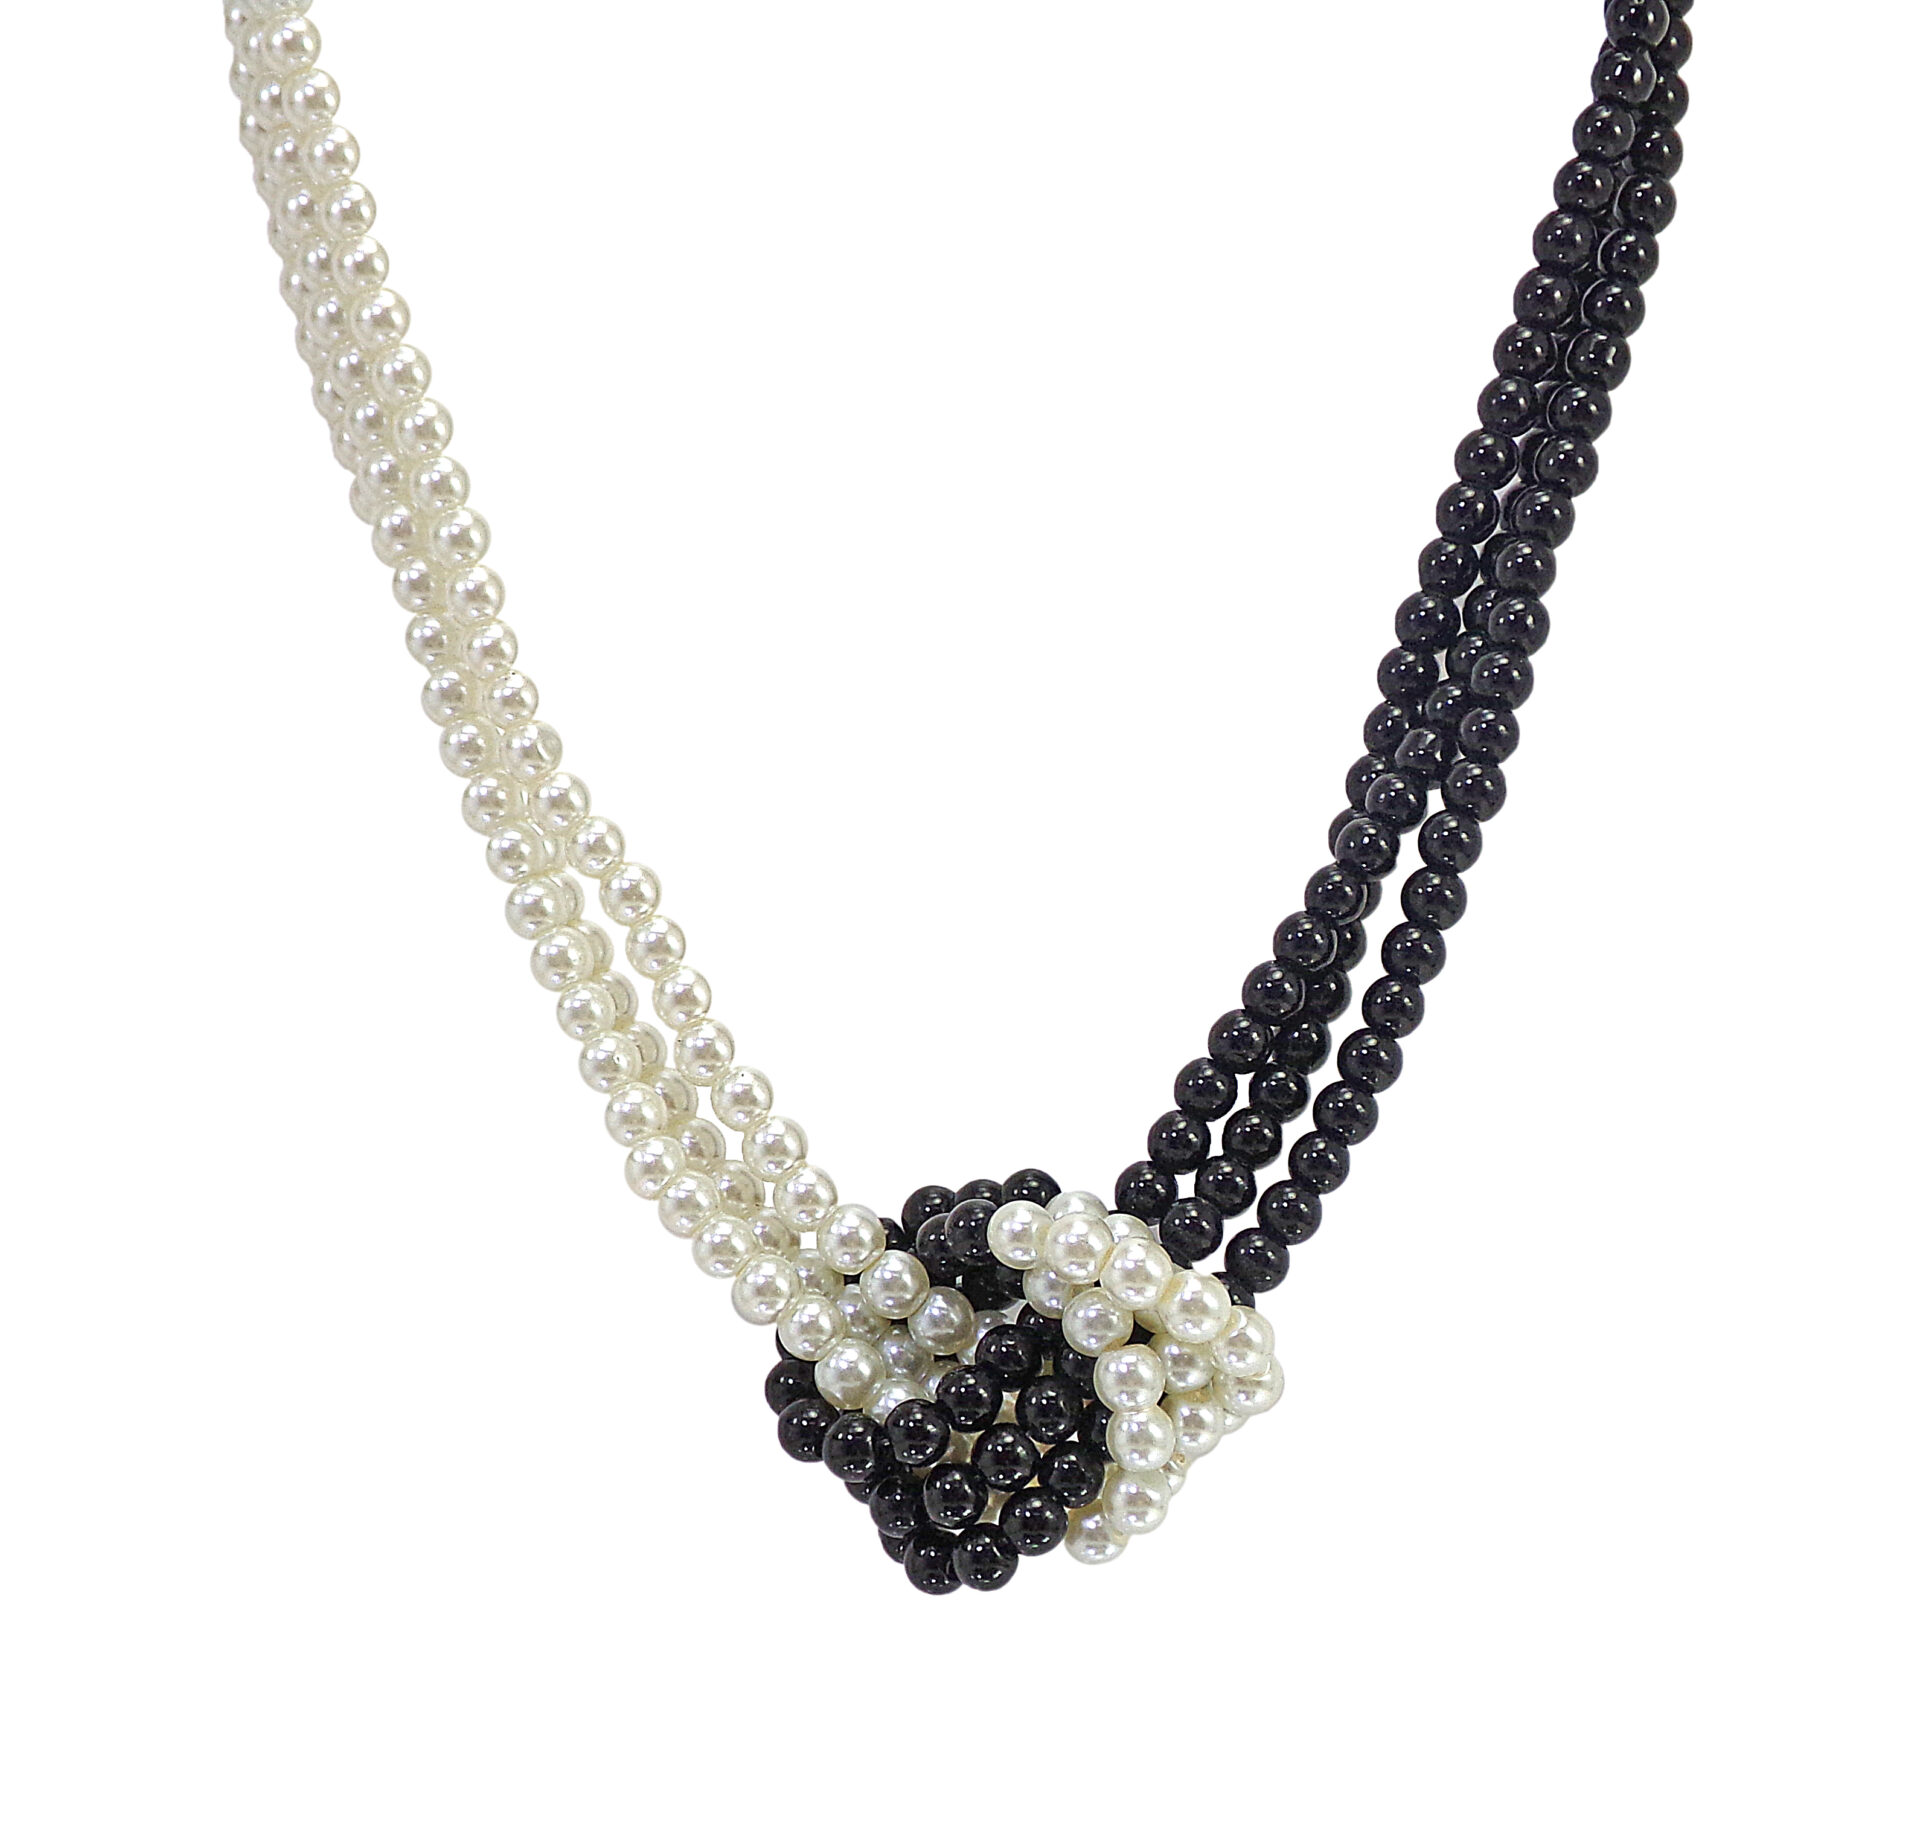 A black and white chunky pearl necklace